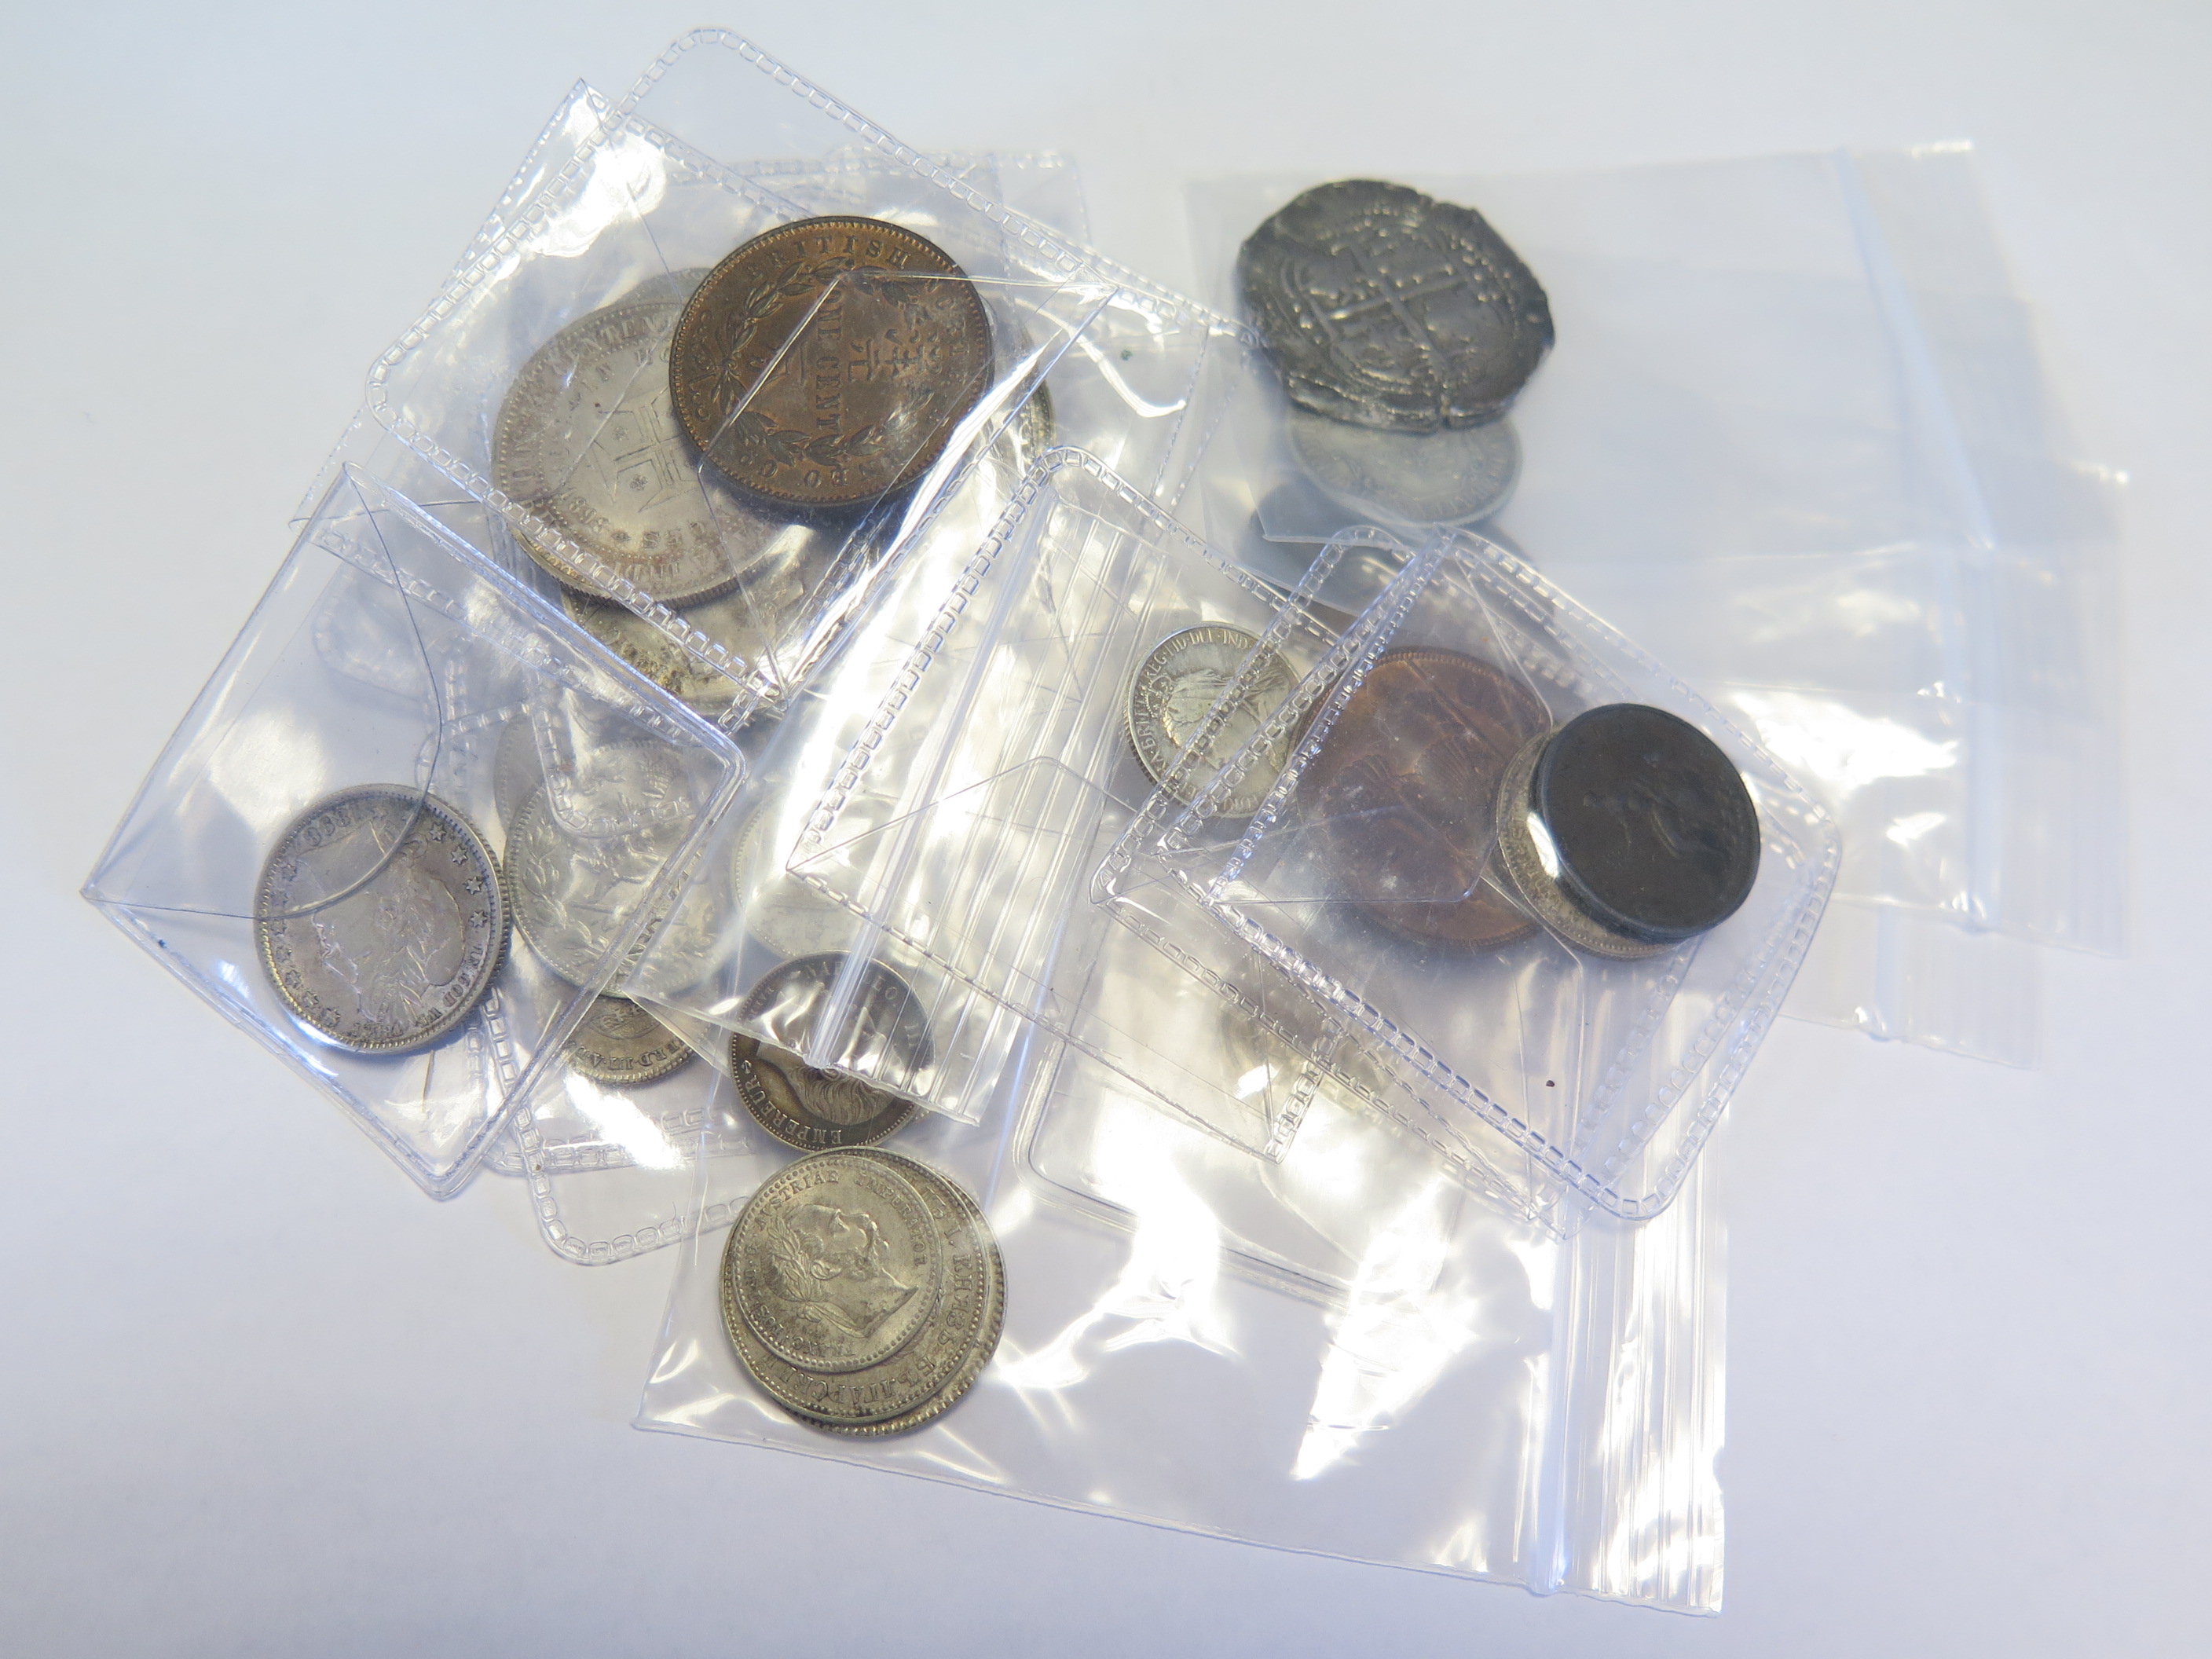 World Coins (37) 18th-20thC including silver, noted: Denmark 10 Ore 1903 GEF, British West Indies